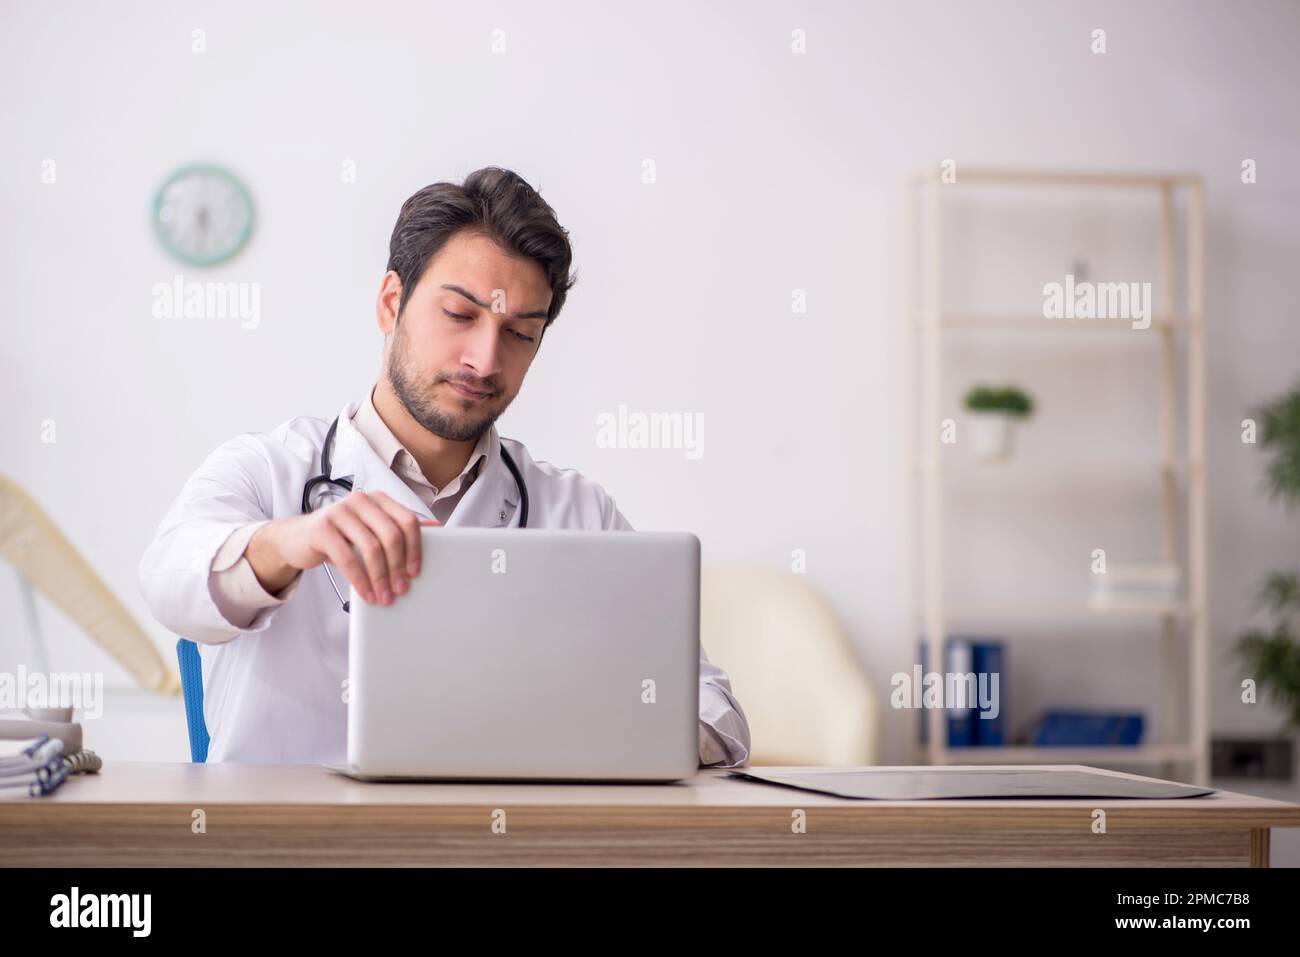 Young doctor in telemedicine concept Stock Photo